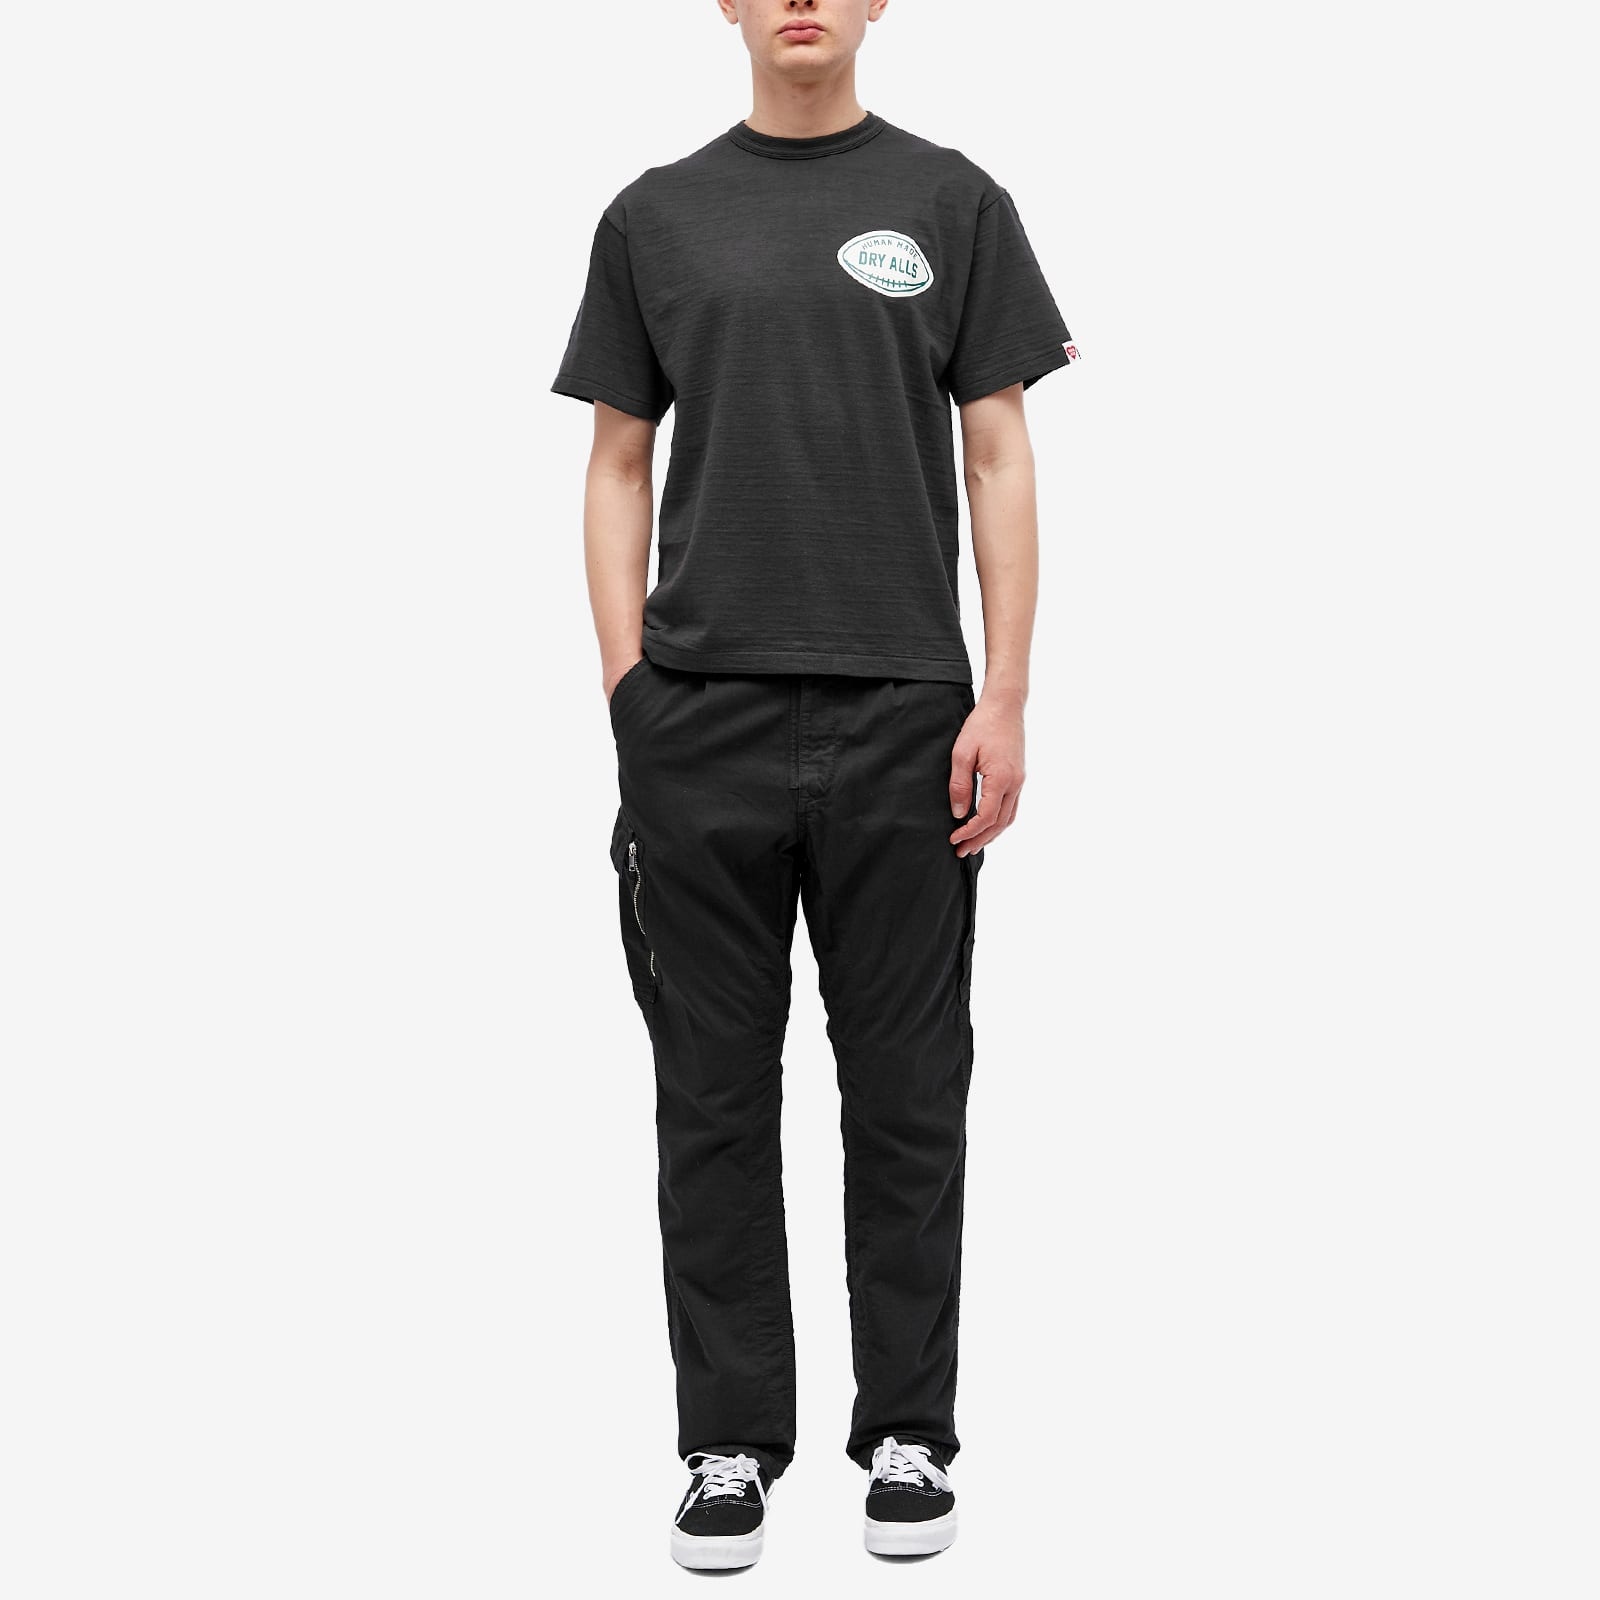 Human Made Dry Alls Past T-Shirt - 4